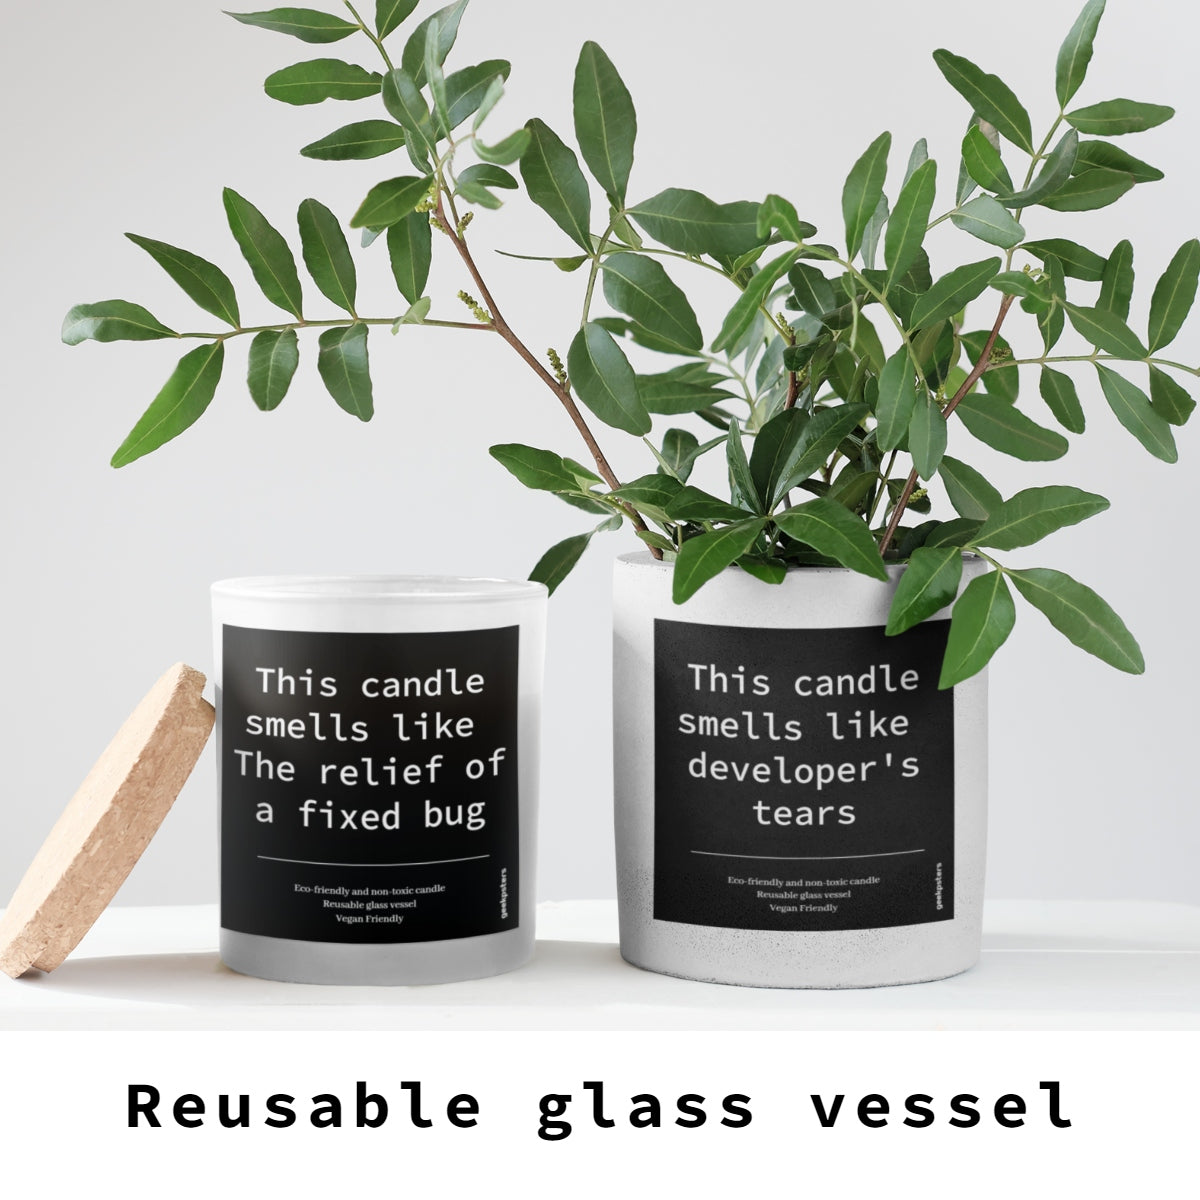 Two "This Candle Smells Like the Joy of Finally Understanding a Difficult Concept" soy candles in reusable glass vessels, one labeled "smells like the relief of a fixed bug" and the other "smells like developer's tears", with a green plant in the background.